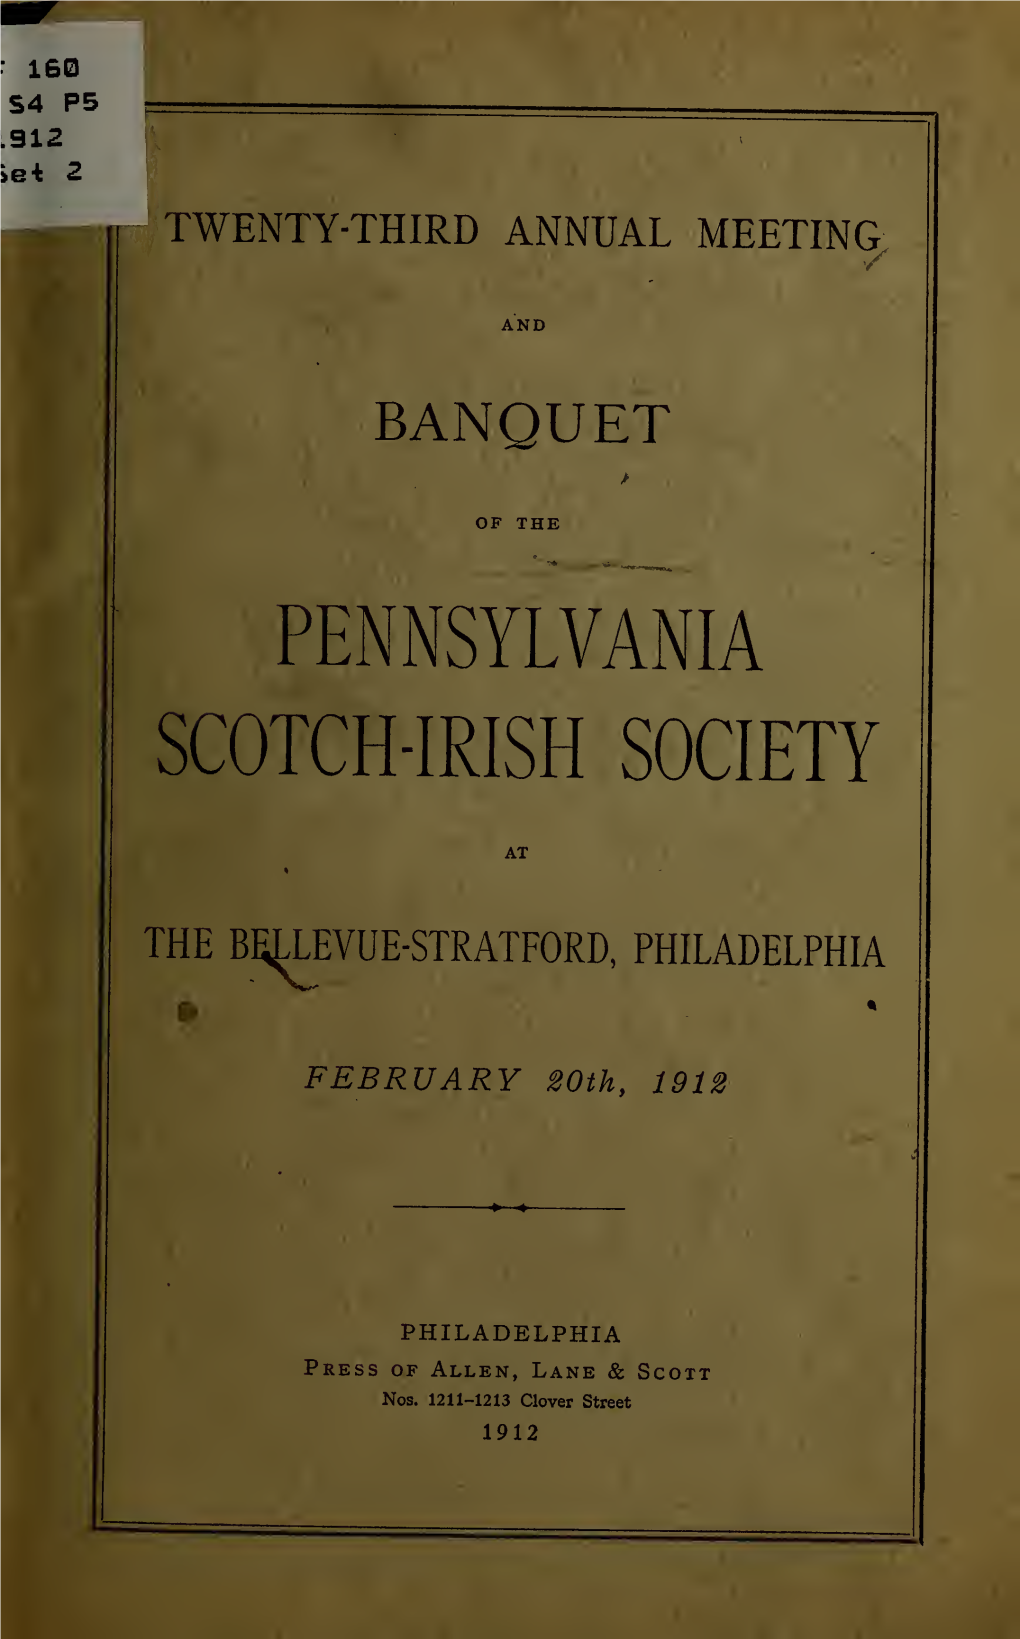 Annual Meeting and Banquet of the Pennsylvania Scotch-Irish Society At